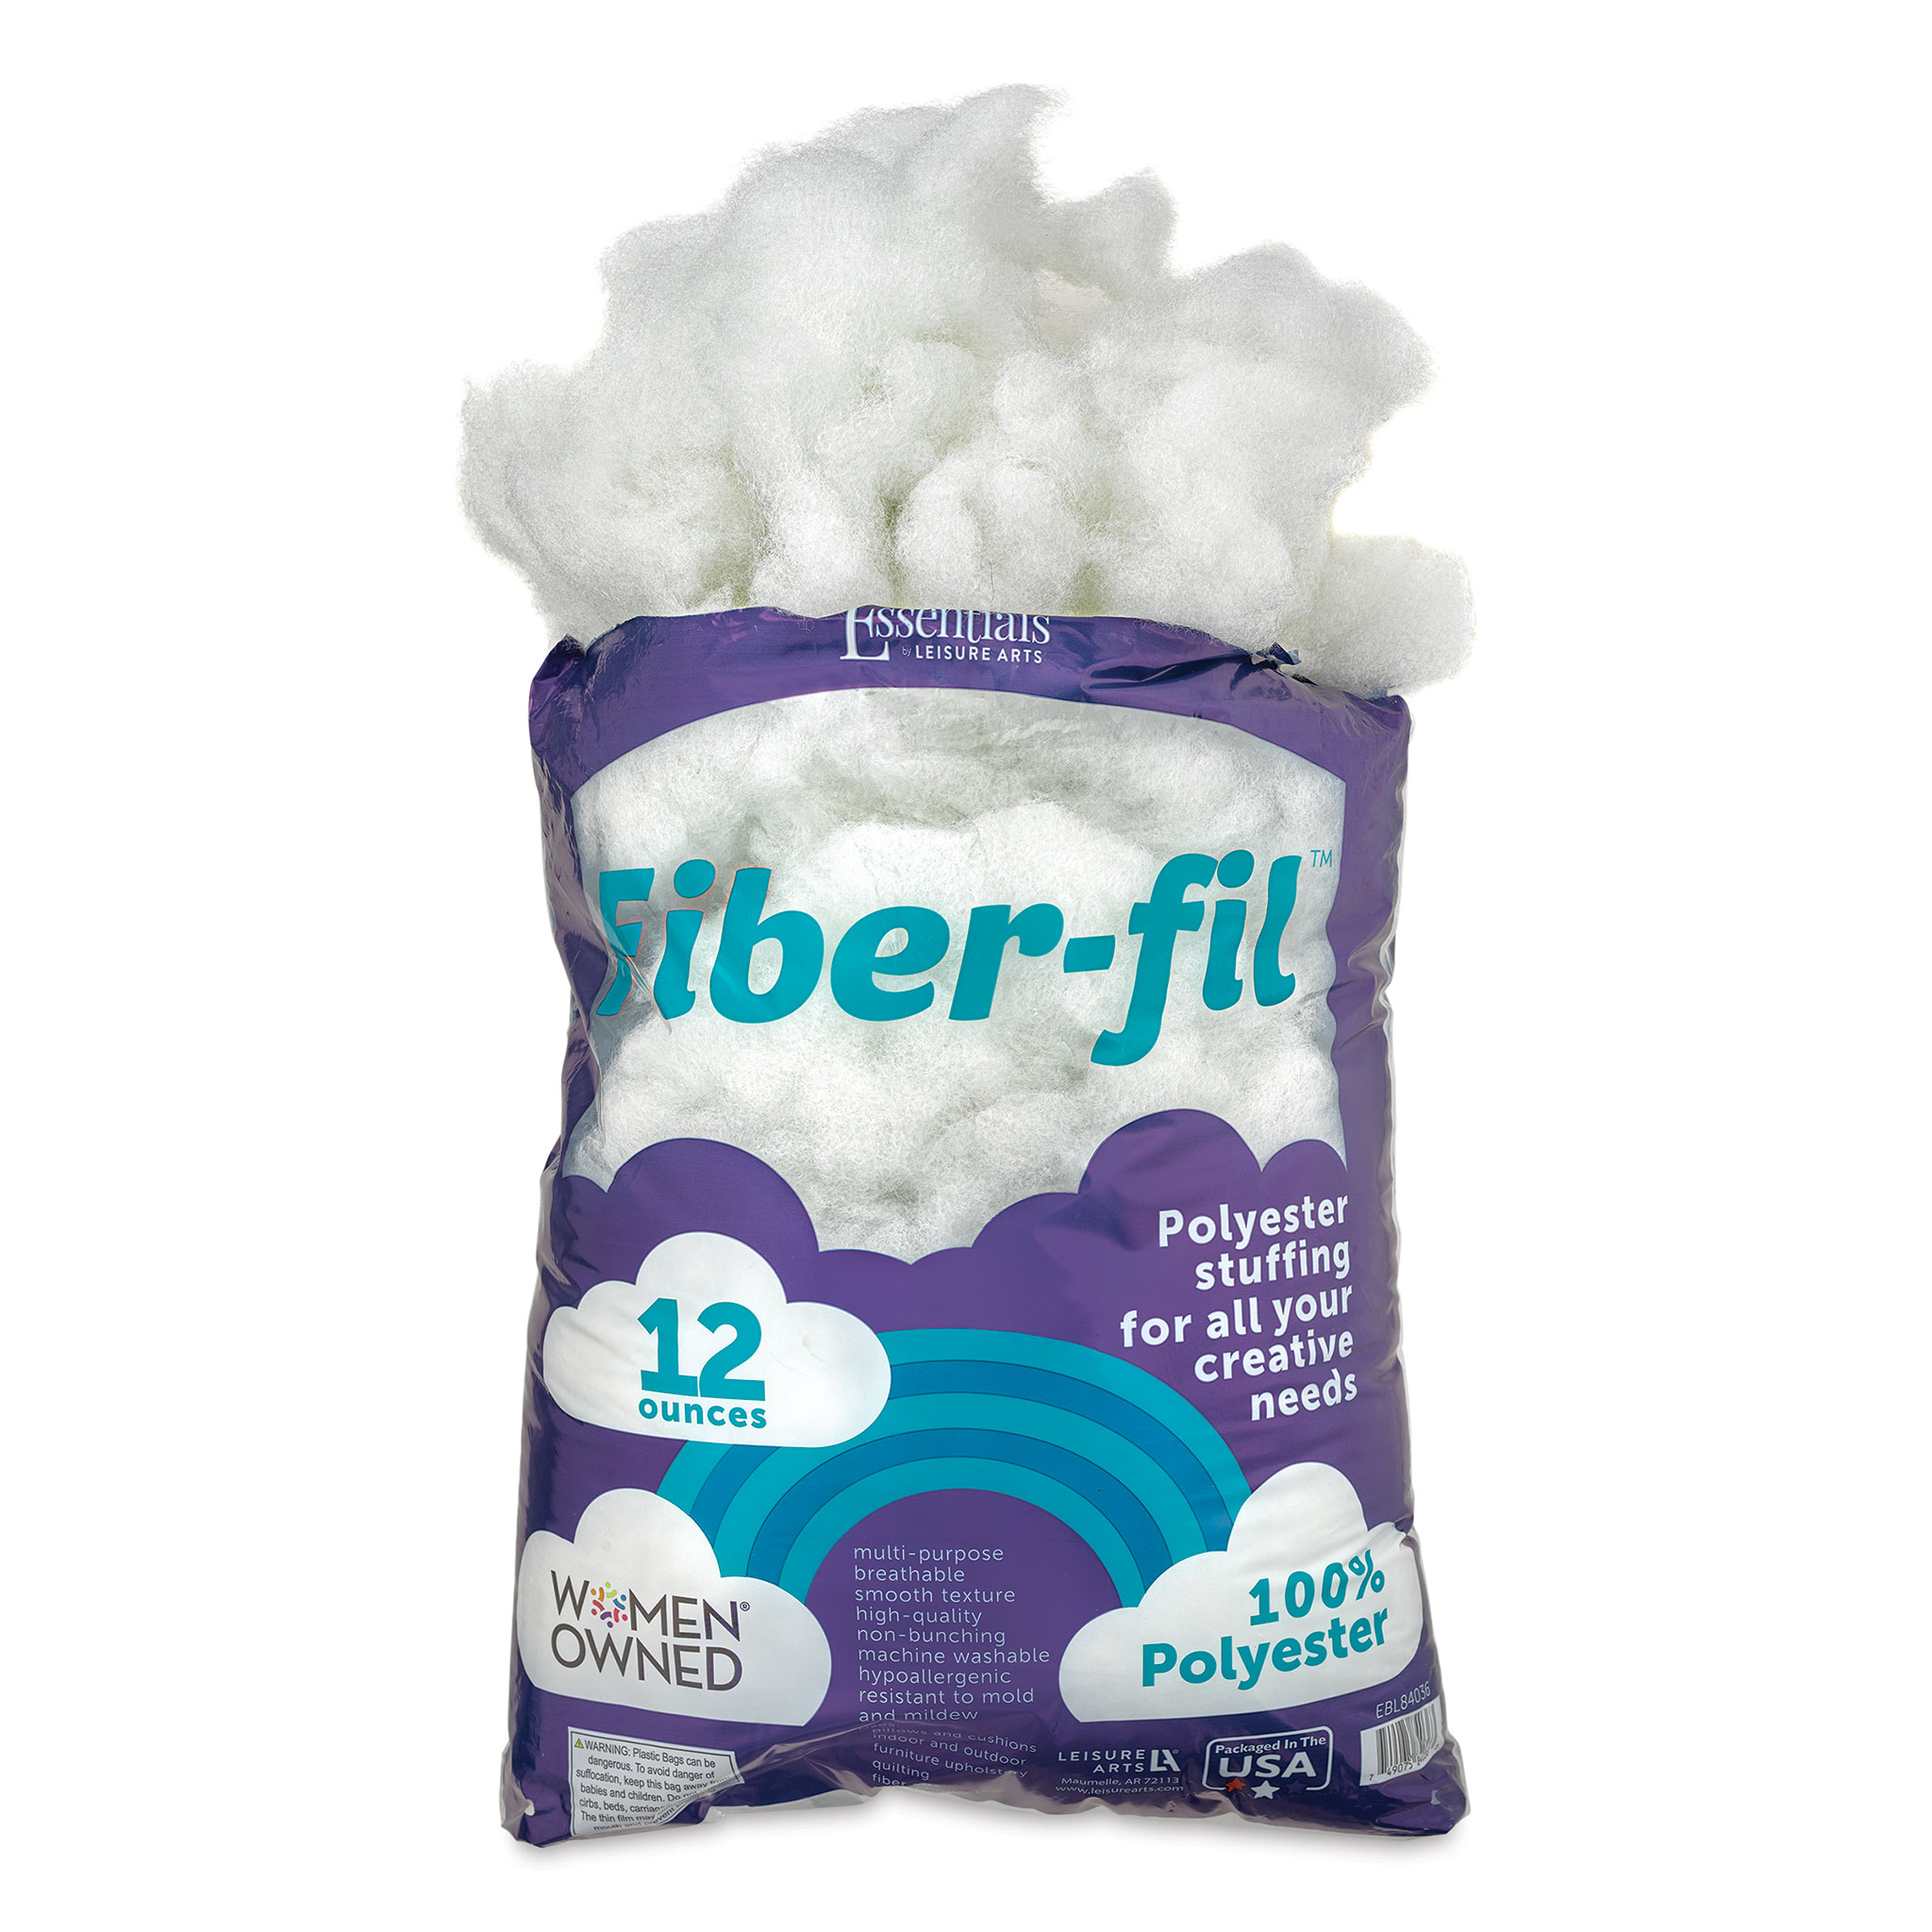 Essentials by Leisure Arts Fiber-fil Polyester Stuffing